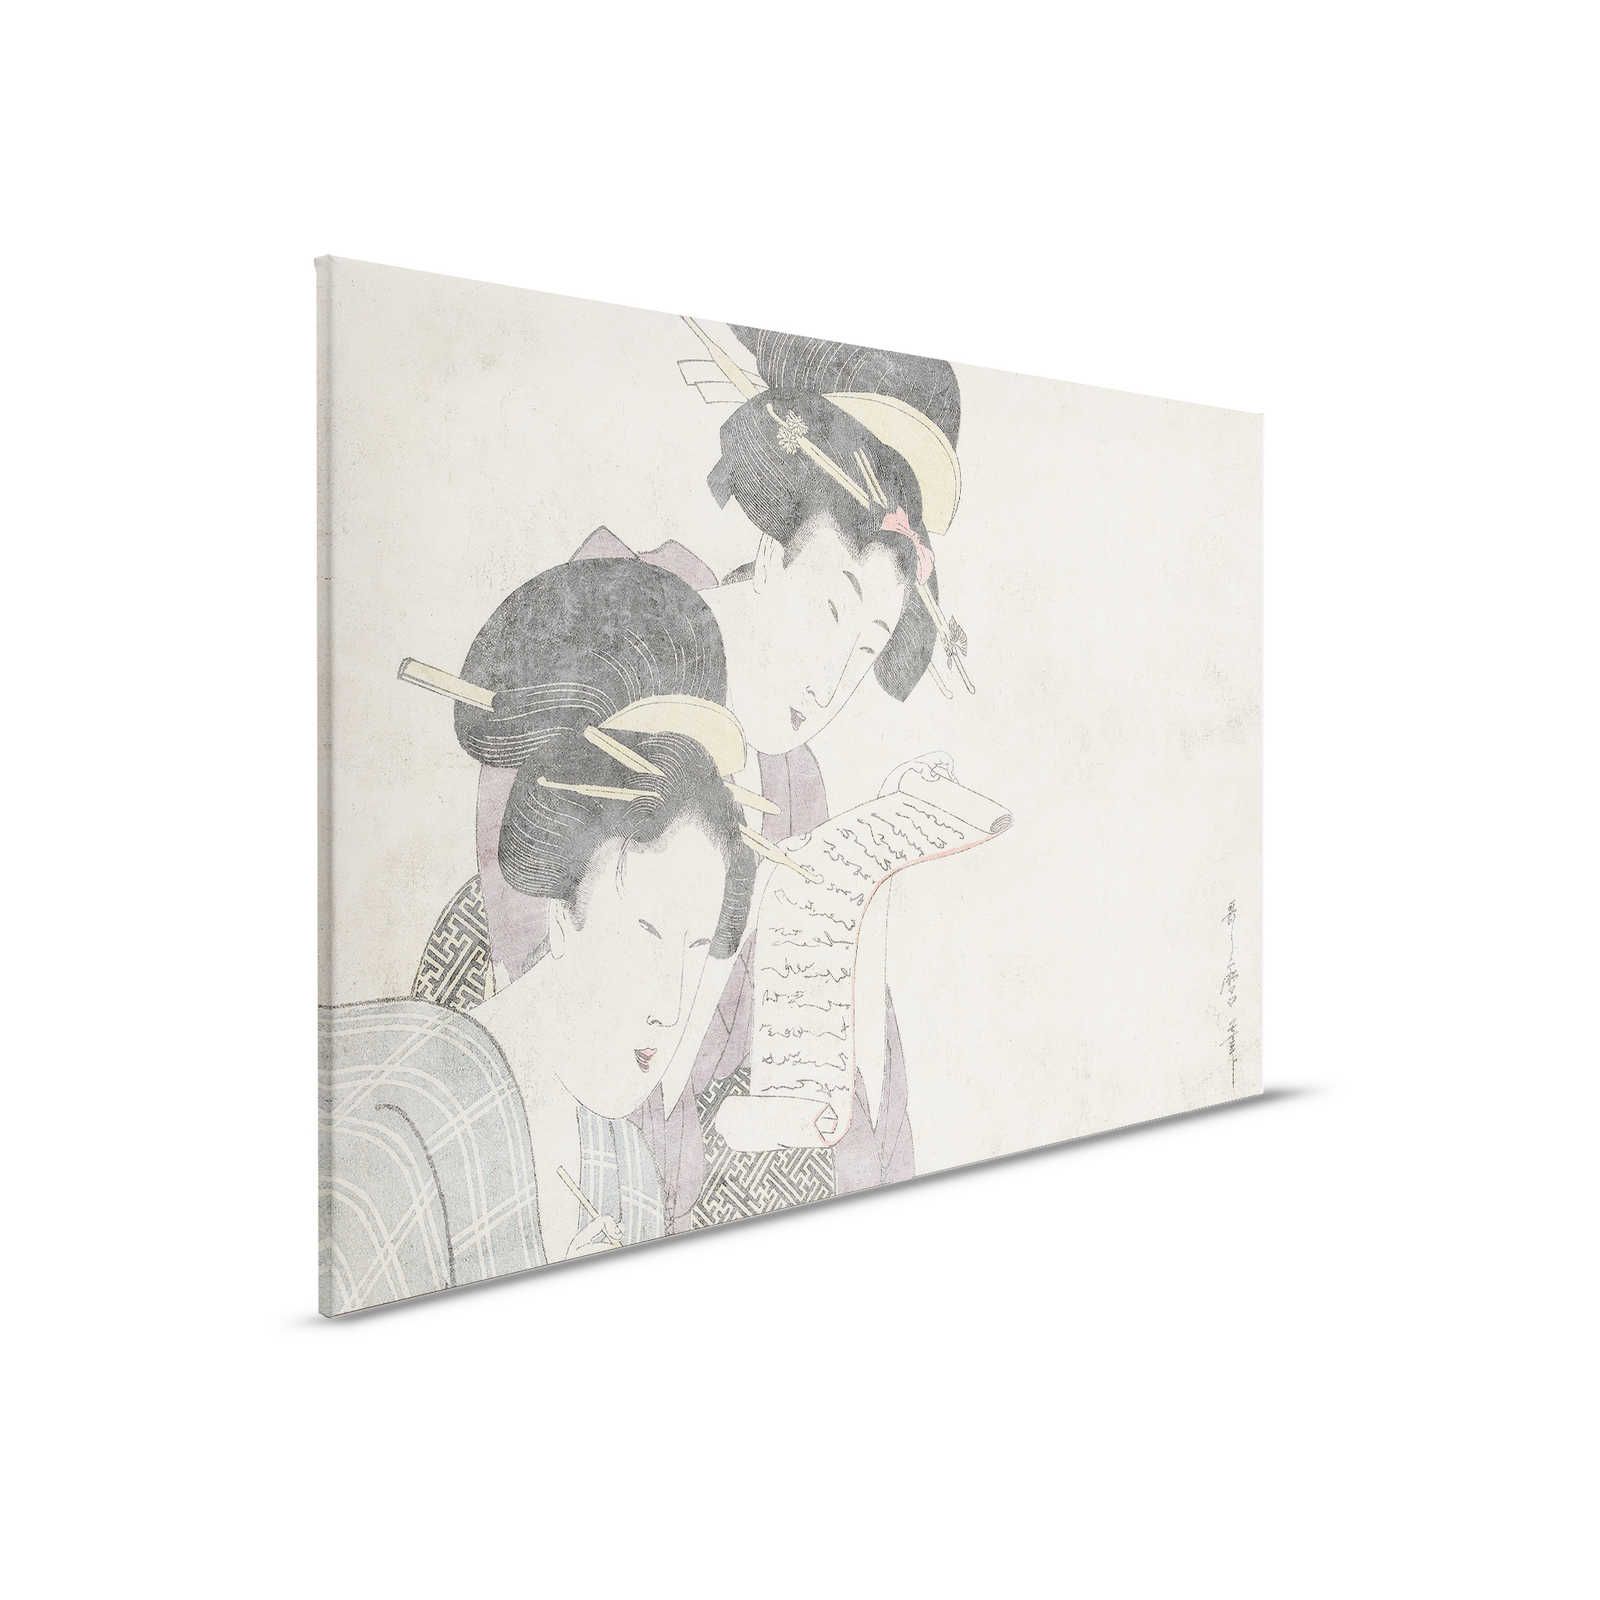 Osaka 3 - Asian Canvas Painting Vintage Drawing & Plaster Texture - 0.90 m x 0.60 m
